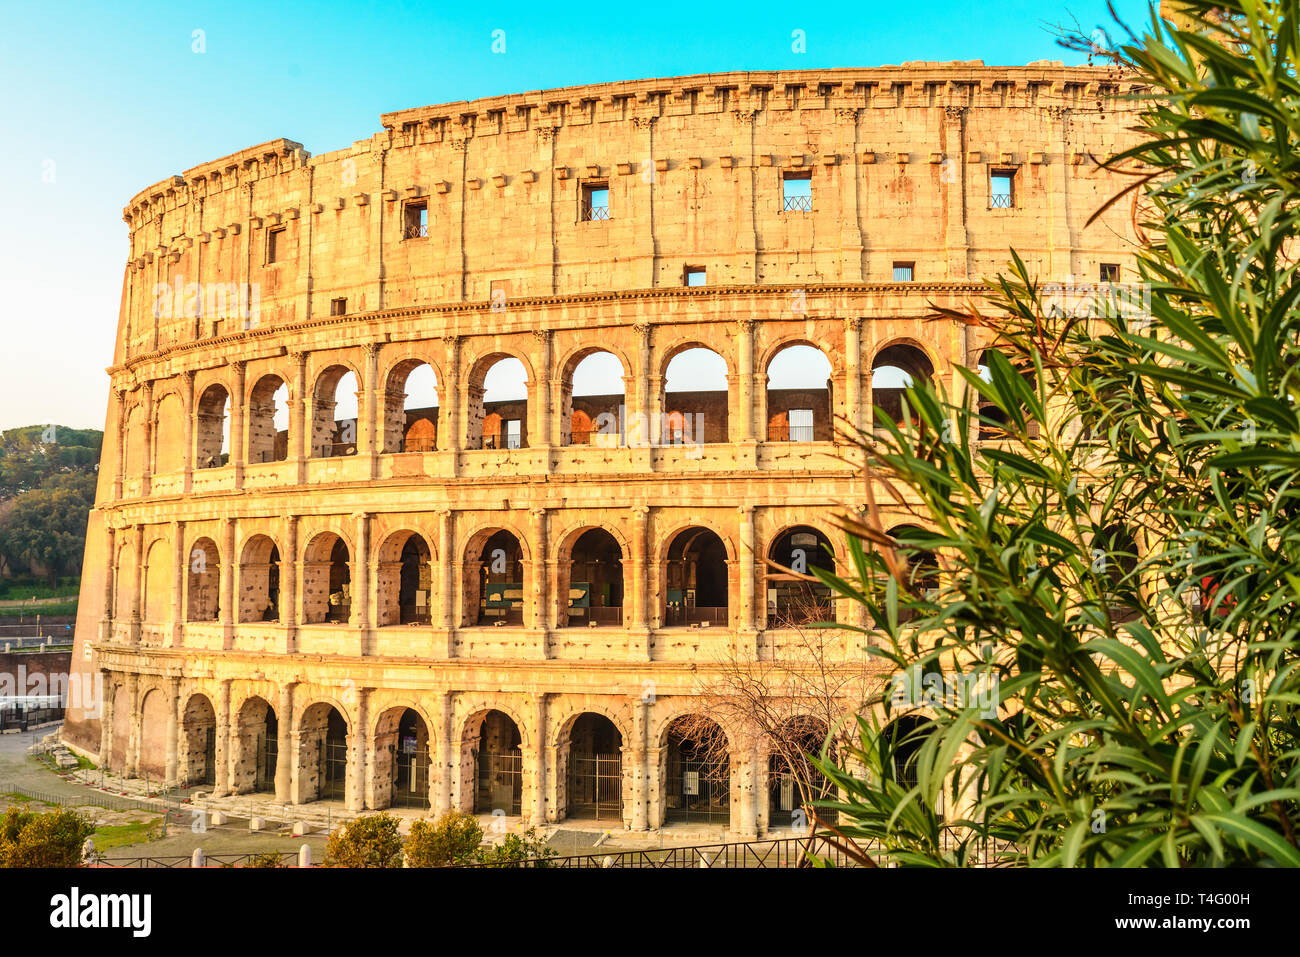 view of Colosseum in Rome, Italy in the sunrise light Stock Photo